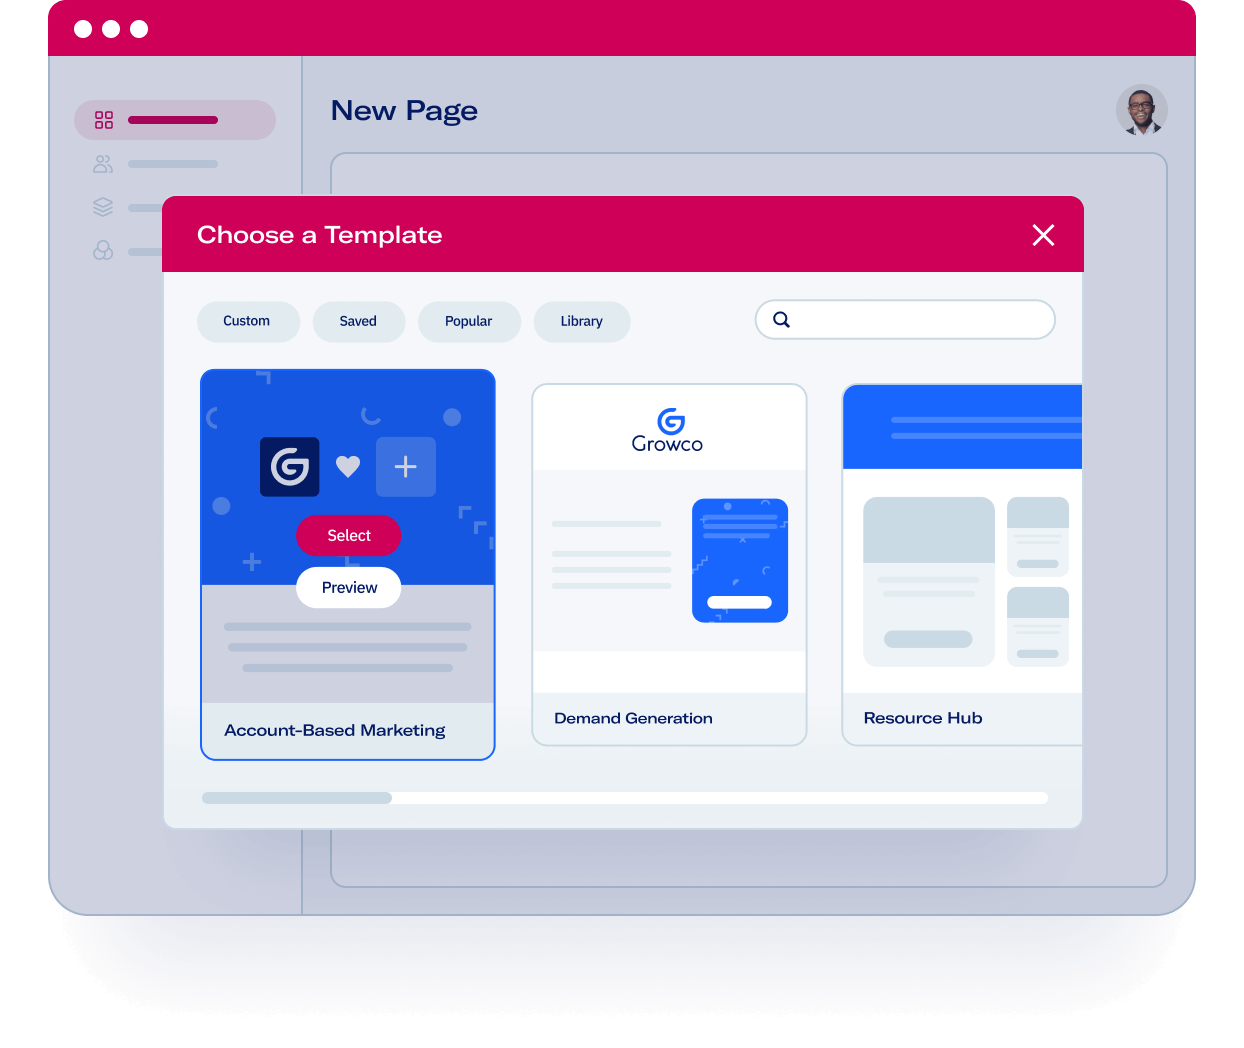 Examples of templates available in Uberflip Pages for different purposes such as Account-based Marketing, Demand Generation, and Resource Hub